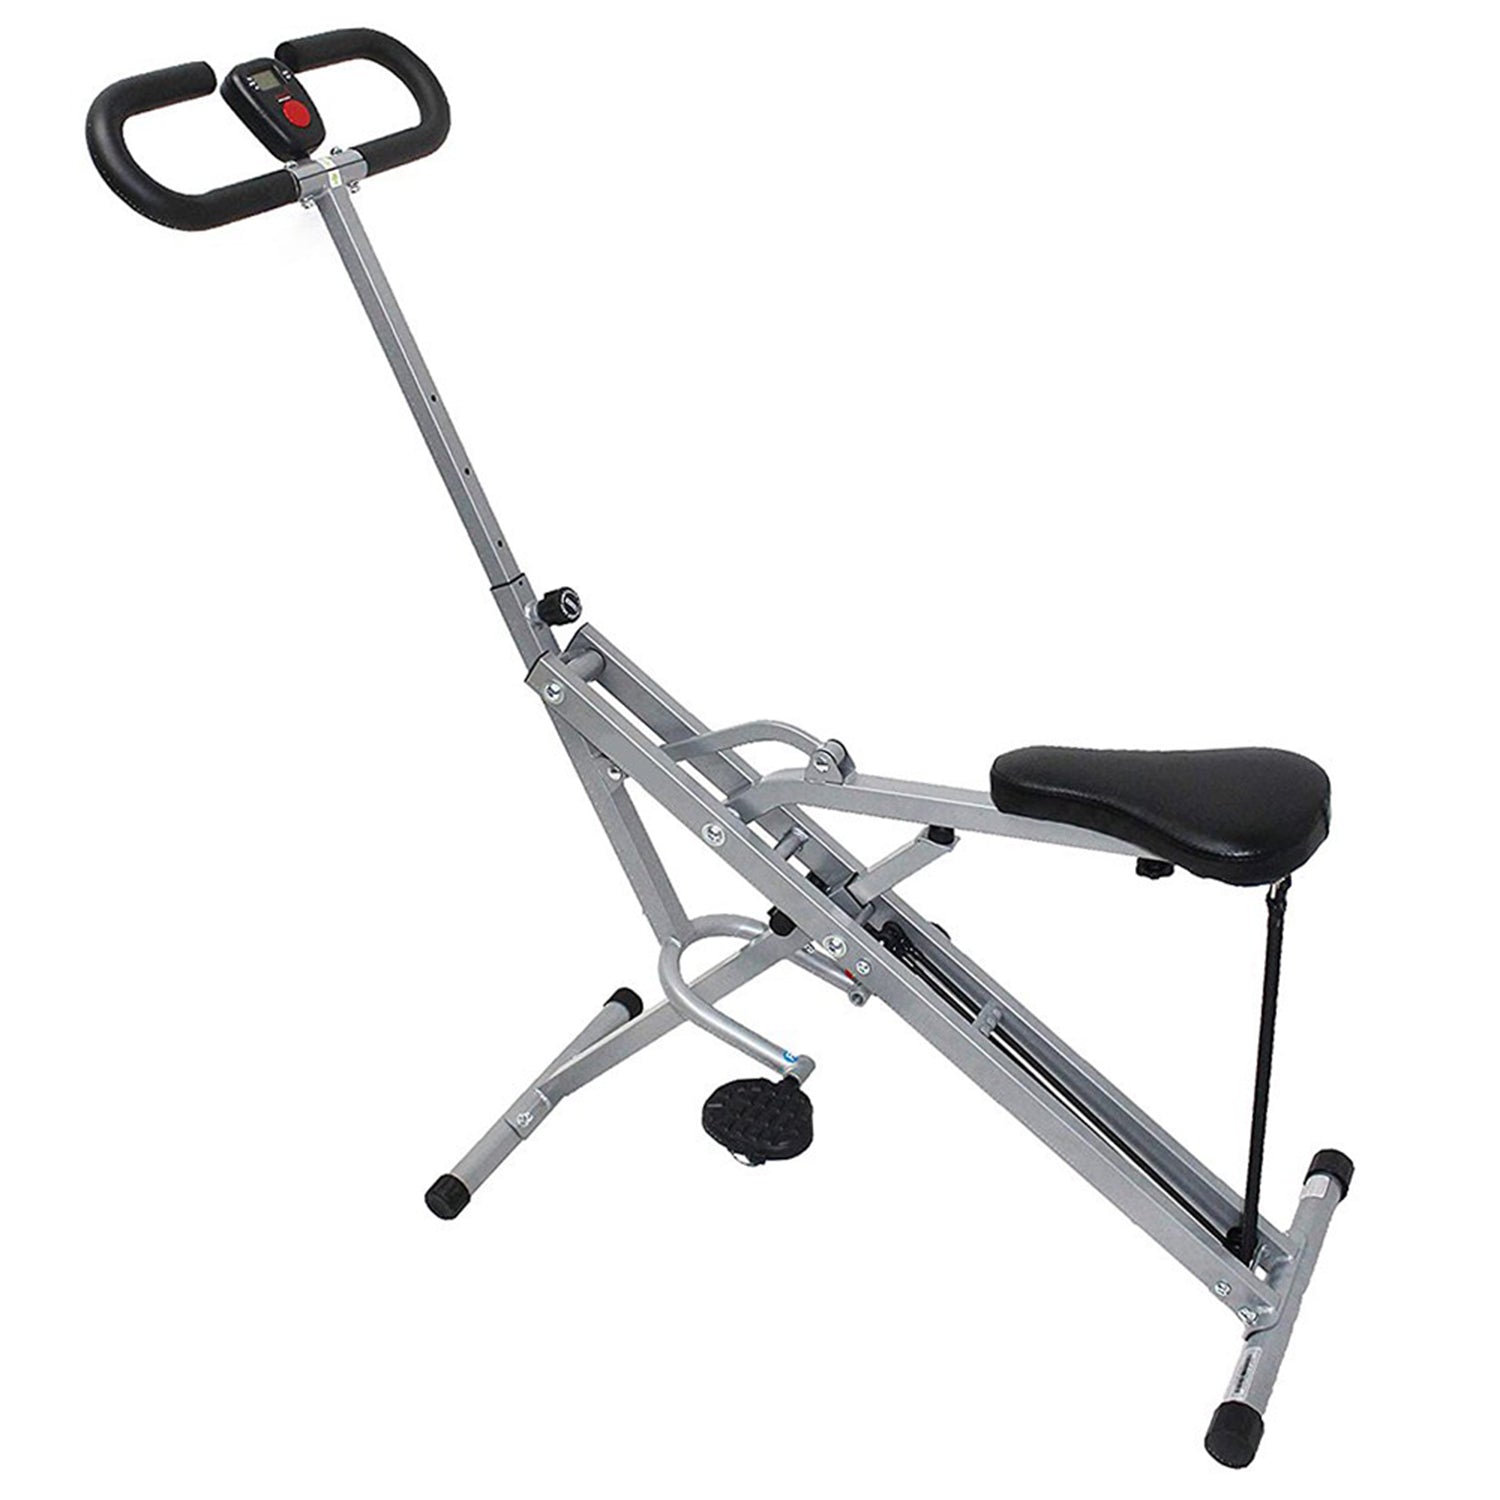 SKONYON Squat Auxiliary Training Device, Can Tighten the Abdomen, Exercise the Waist, Buttocks, Thighs and Legs, Gray